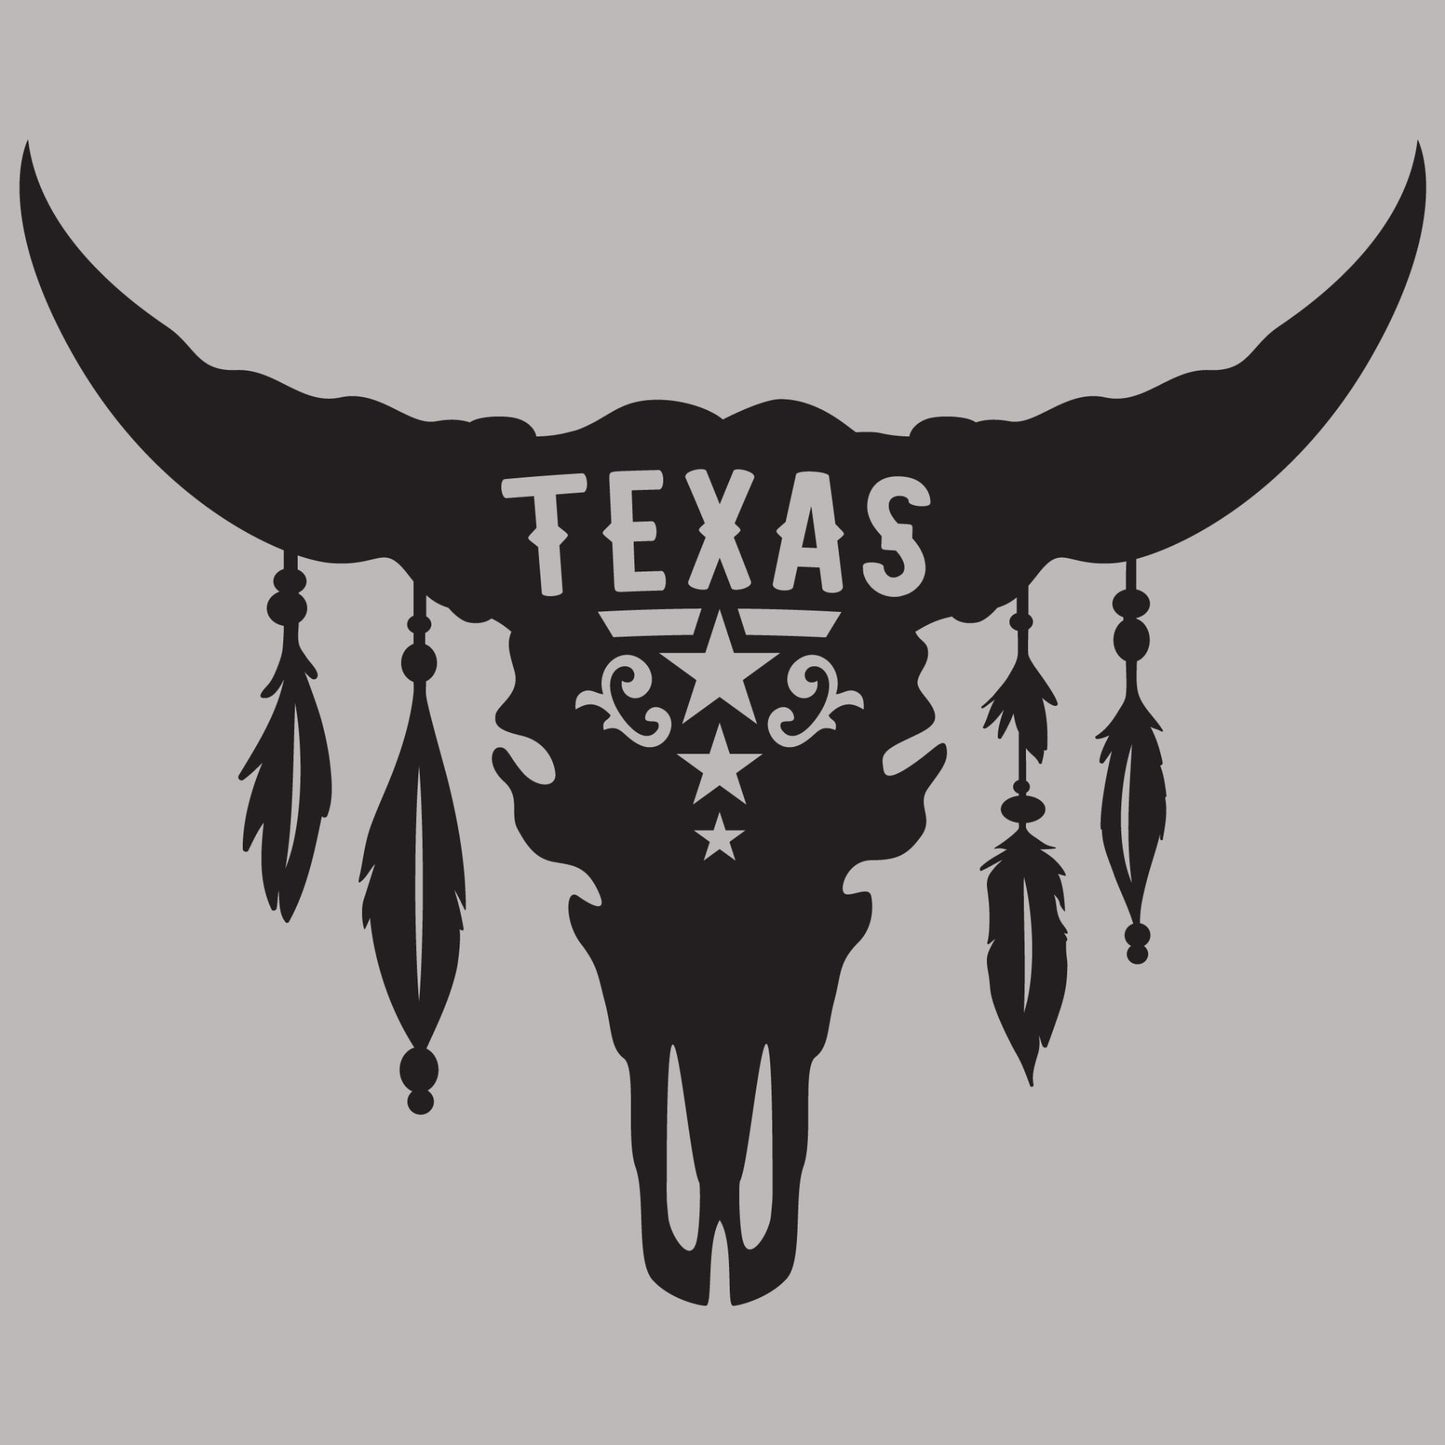 Texas Longhorn Dreams T-shirt | Majestic Longhorn and Dream Catcher Design | Embrace Texan Heritage with Bohemian Flair